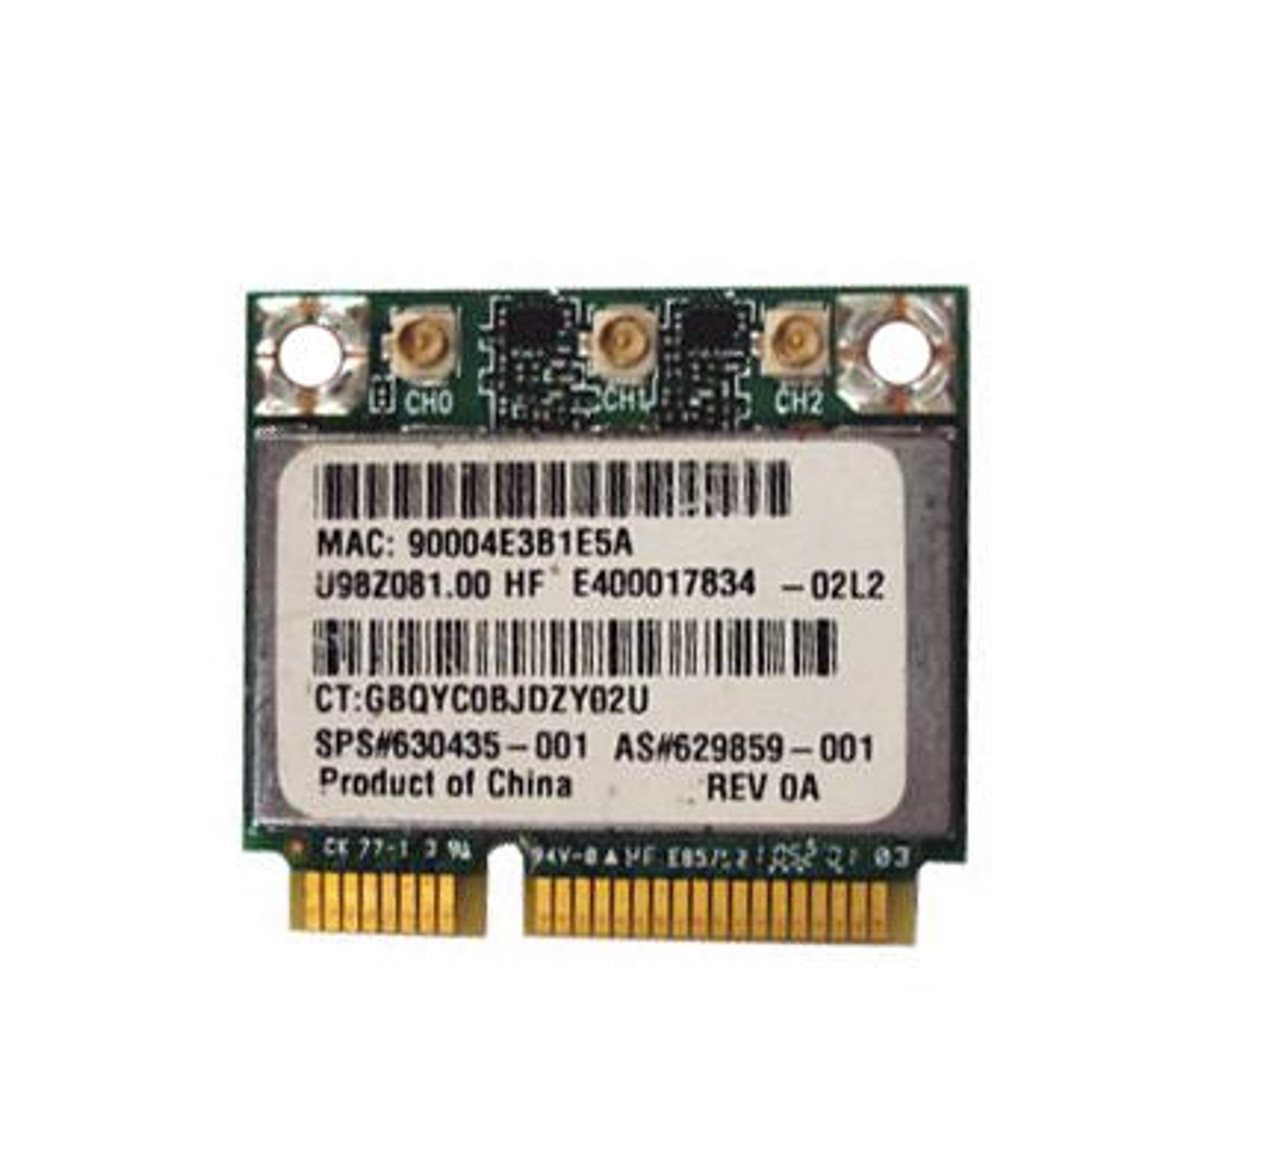 630435-001 HP Atheros 300Mbps 2.4GHz IEEE 802.11b/g/n PCI Express WLAN Wireless Network Card